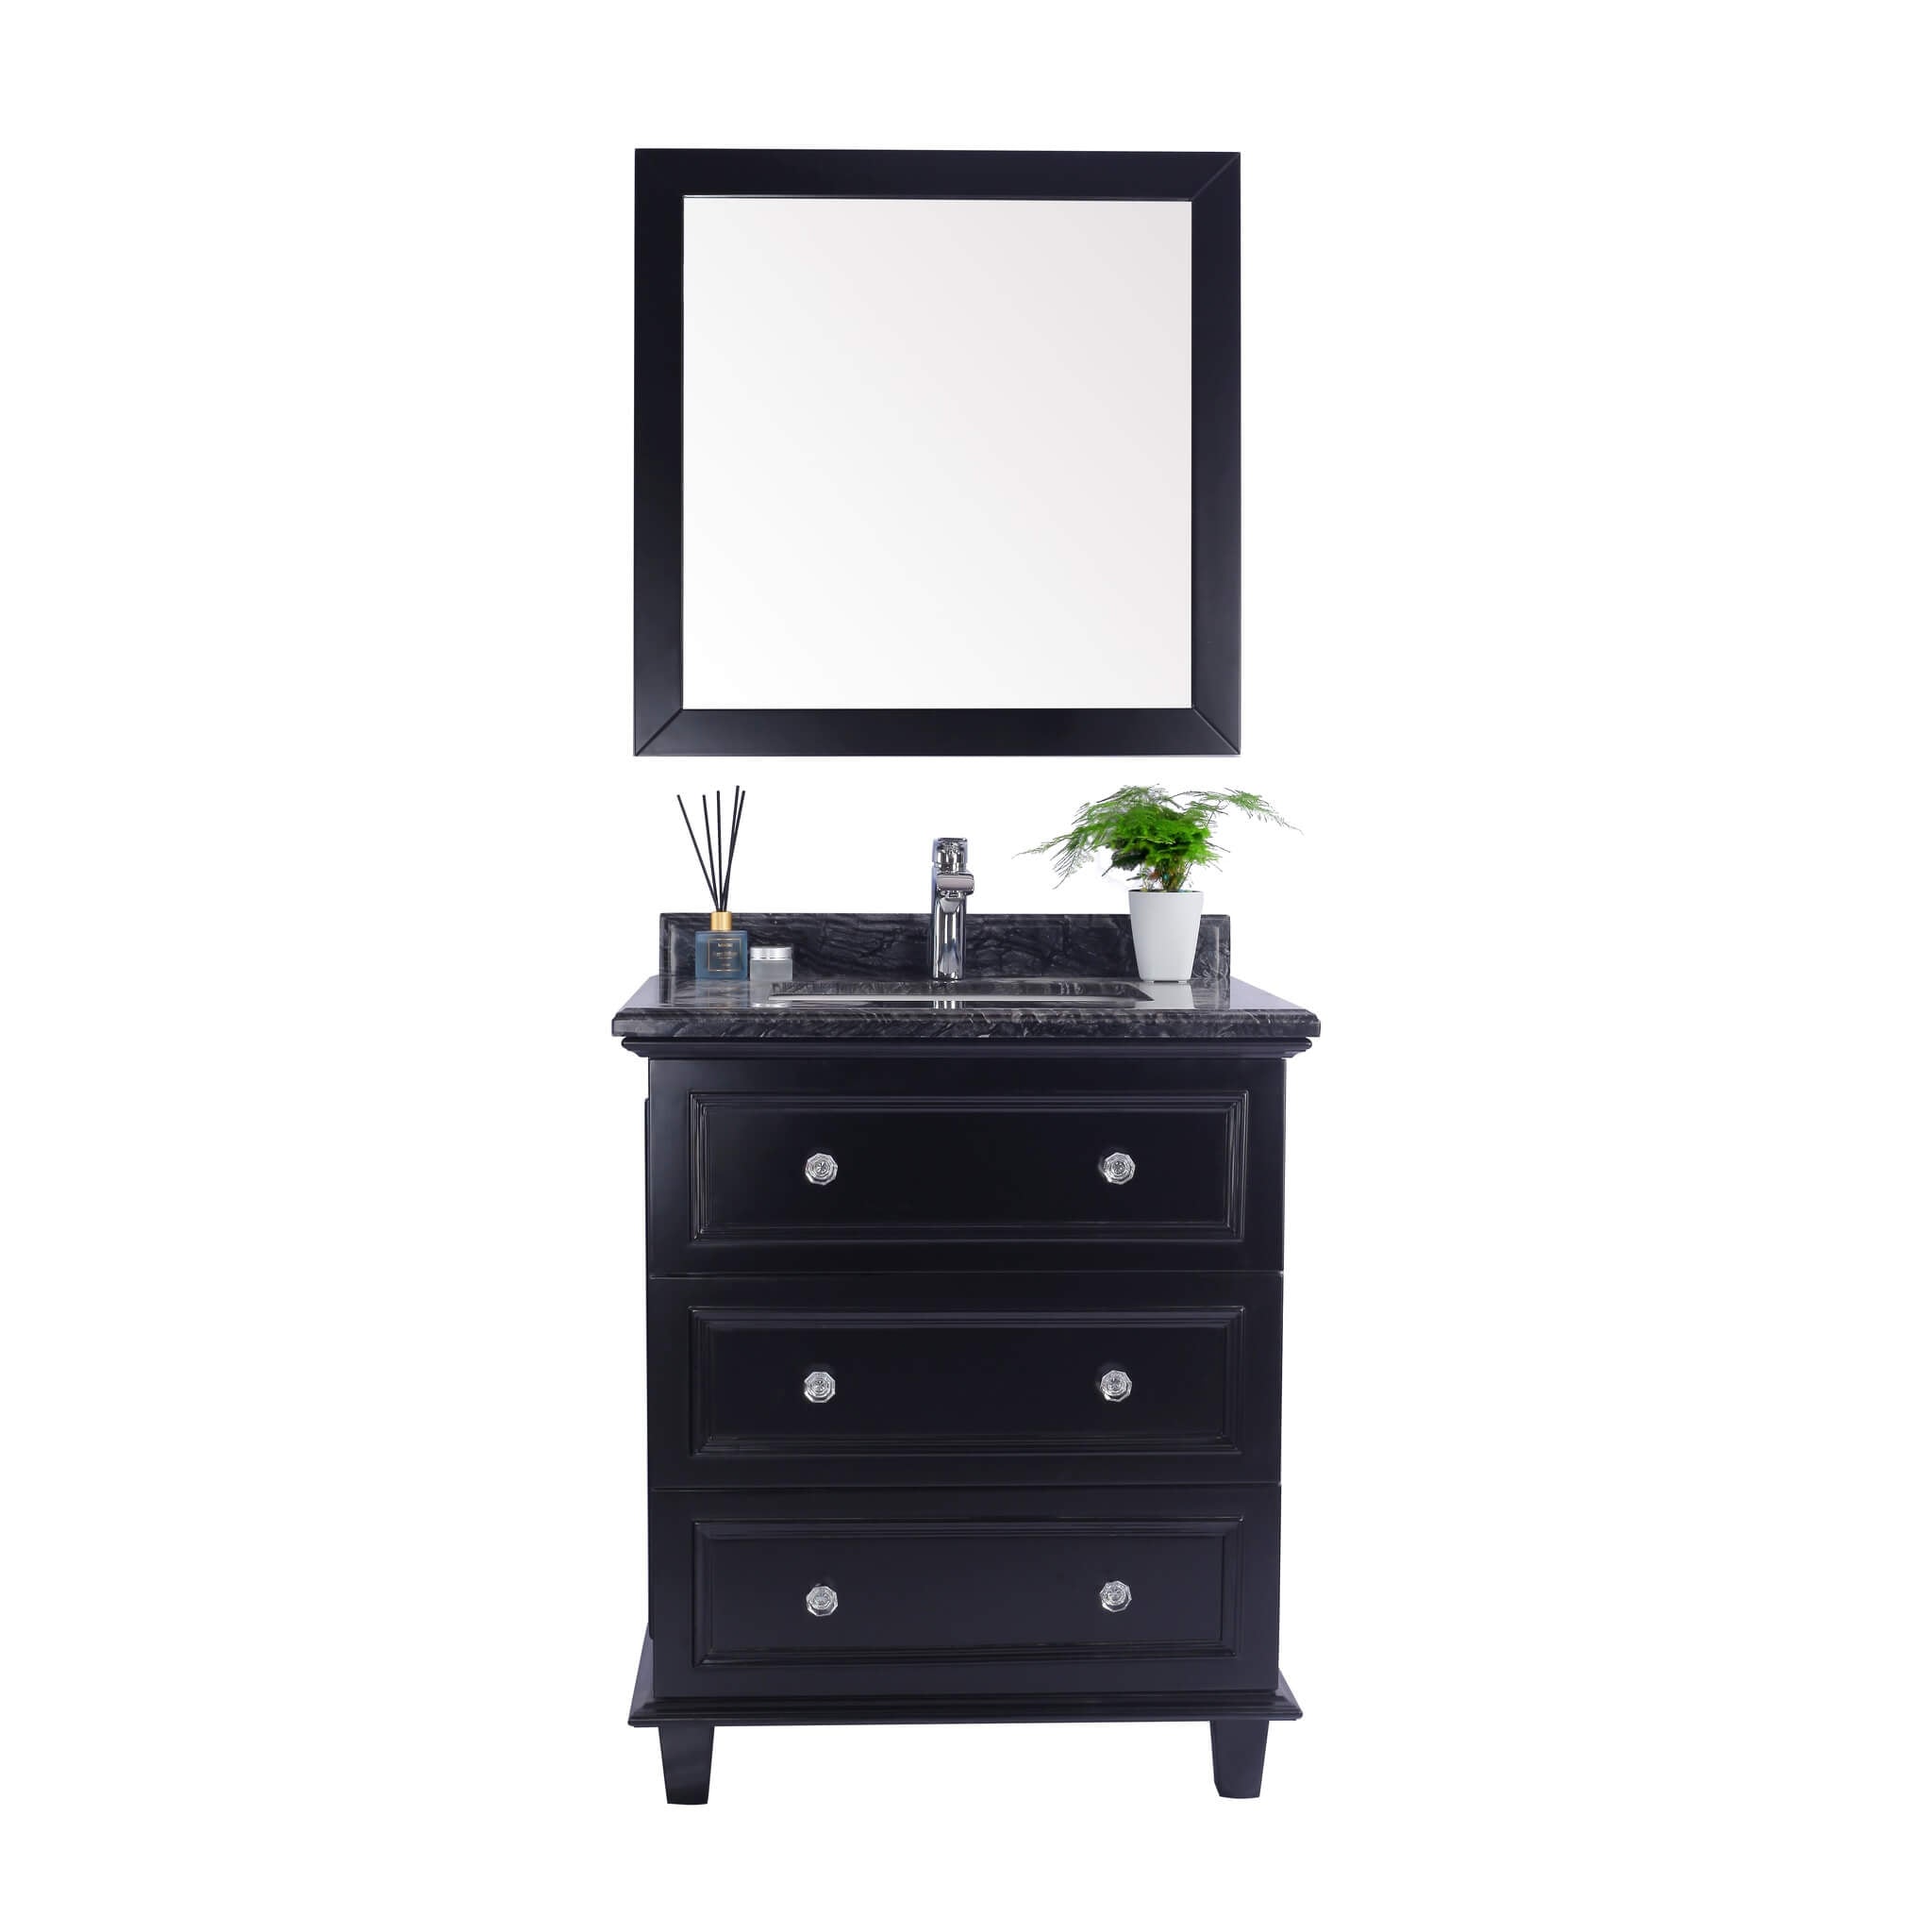 LAVIVA Luna 313DVN-30E-BW 30" Single Bathroom Vanity in Espresso with Black Wood Marble, White Rectangle Sink, Front View